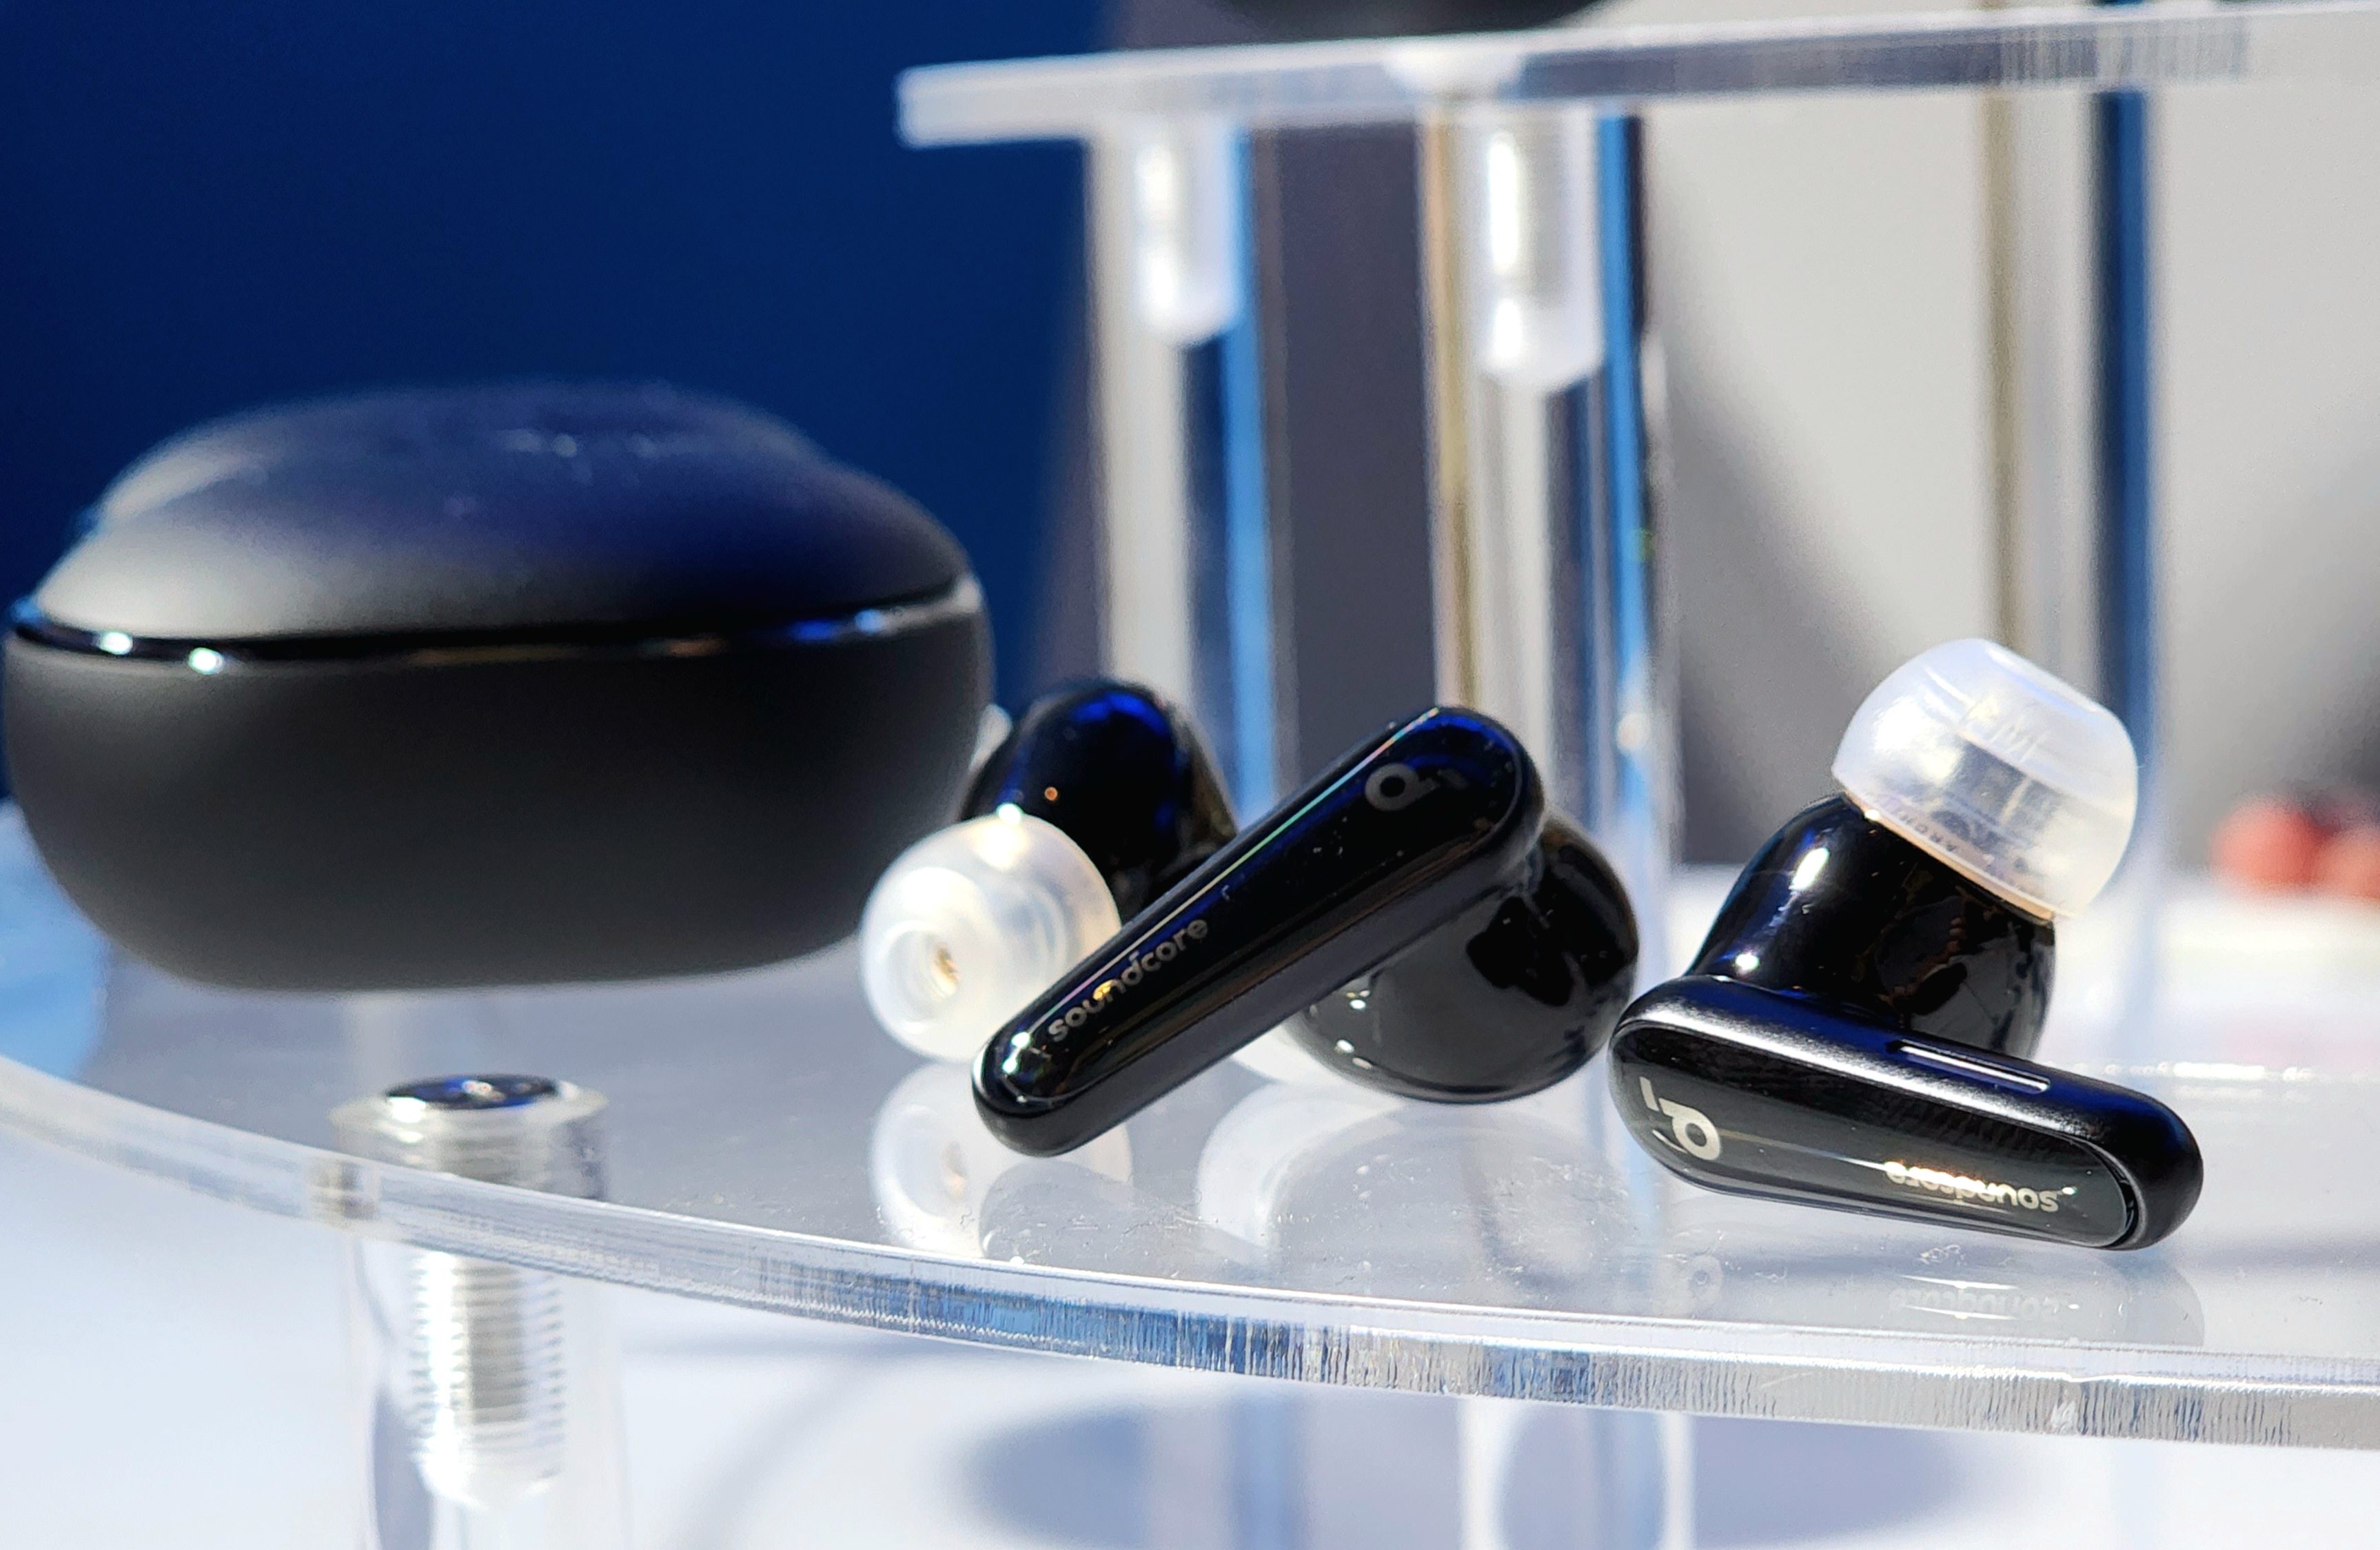 These $149 earbuds solved my biggest problem with Apple's AirPods